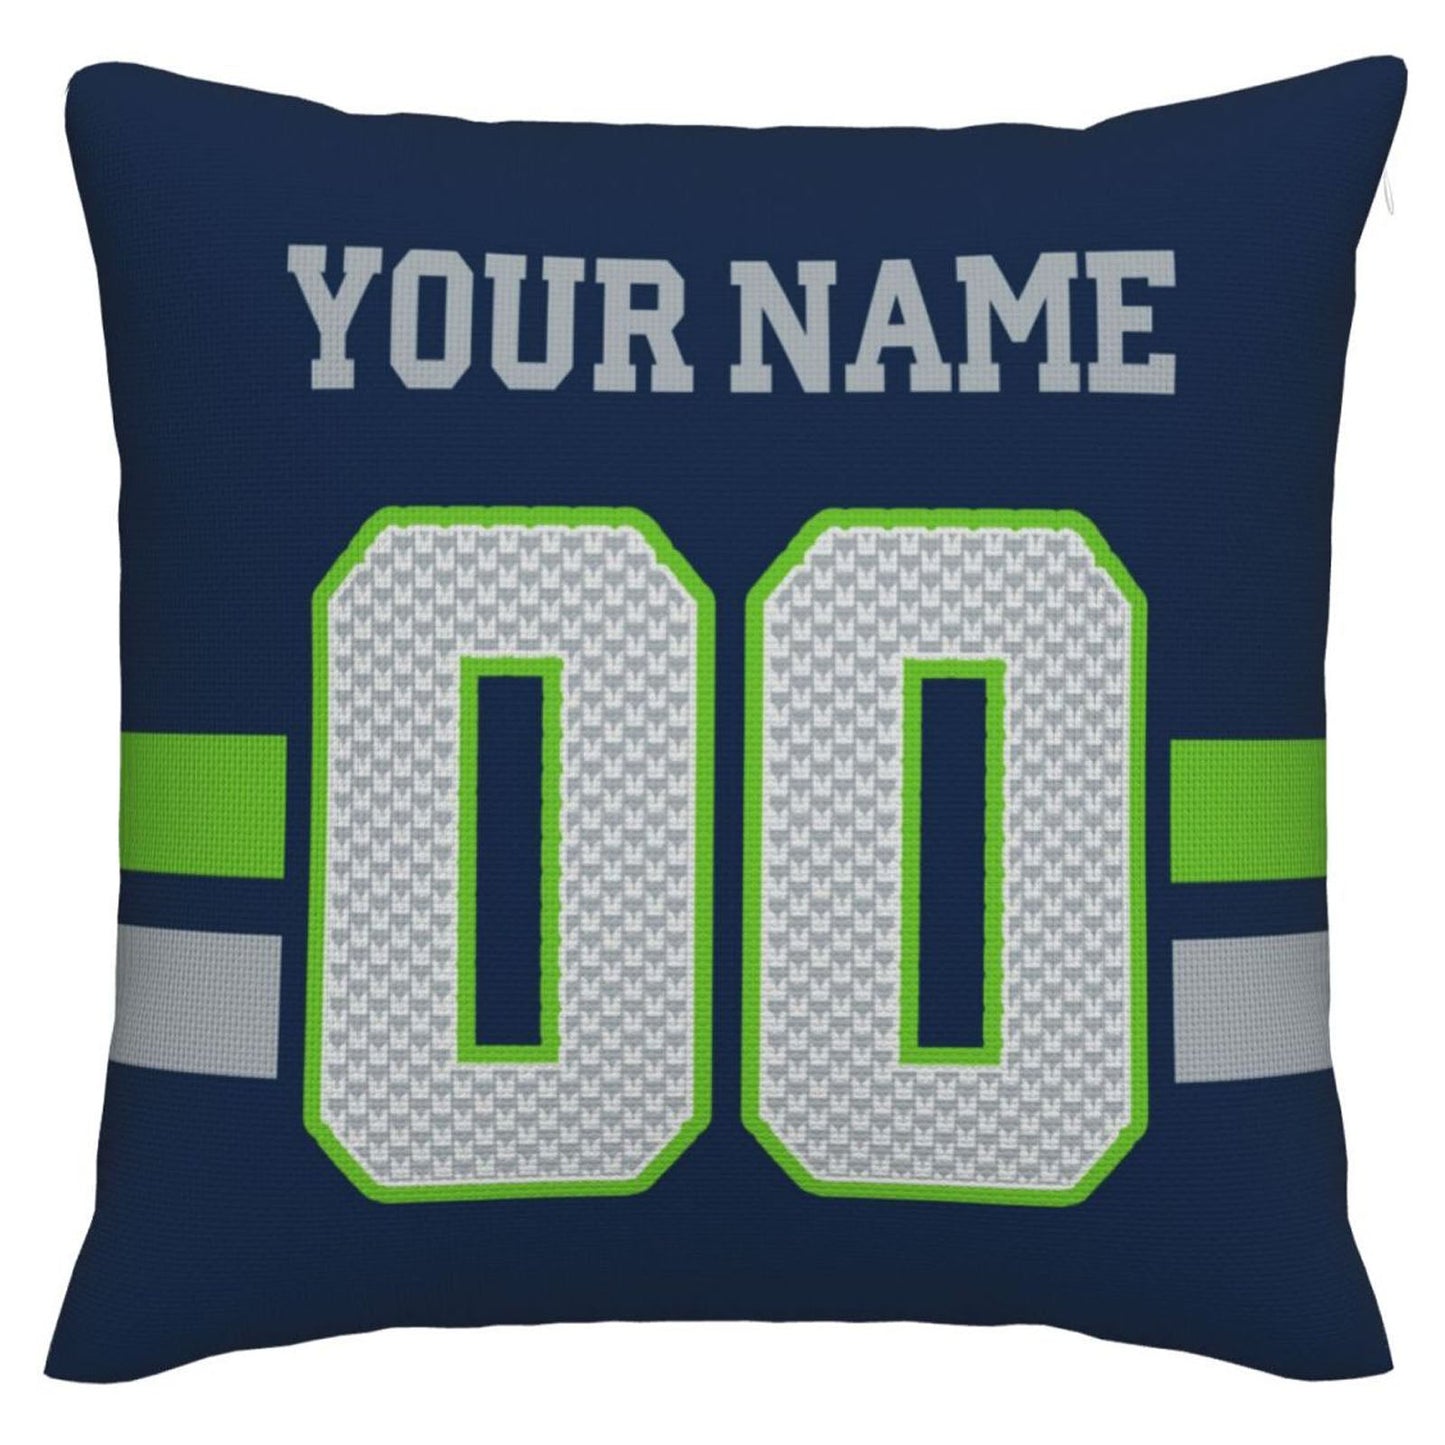 Custom S.Seahawks Pillow Decorative Throw Pillow Case - Print Personalized Football Team Fans Name & Number Birthday Gift Football Pillows